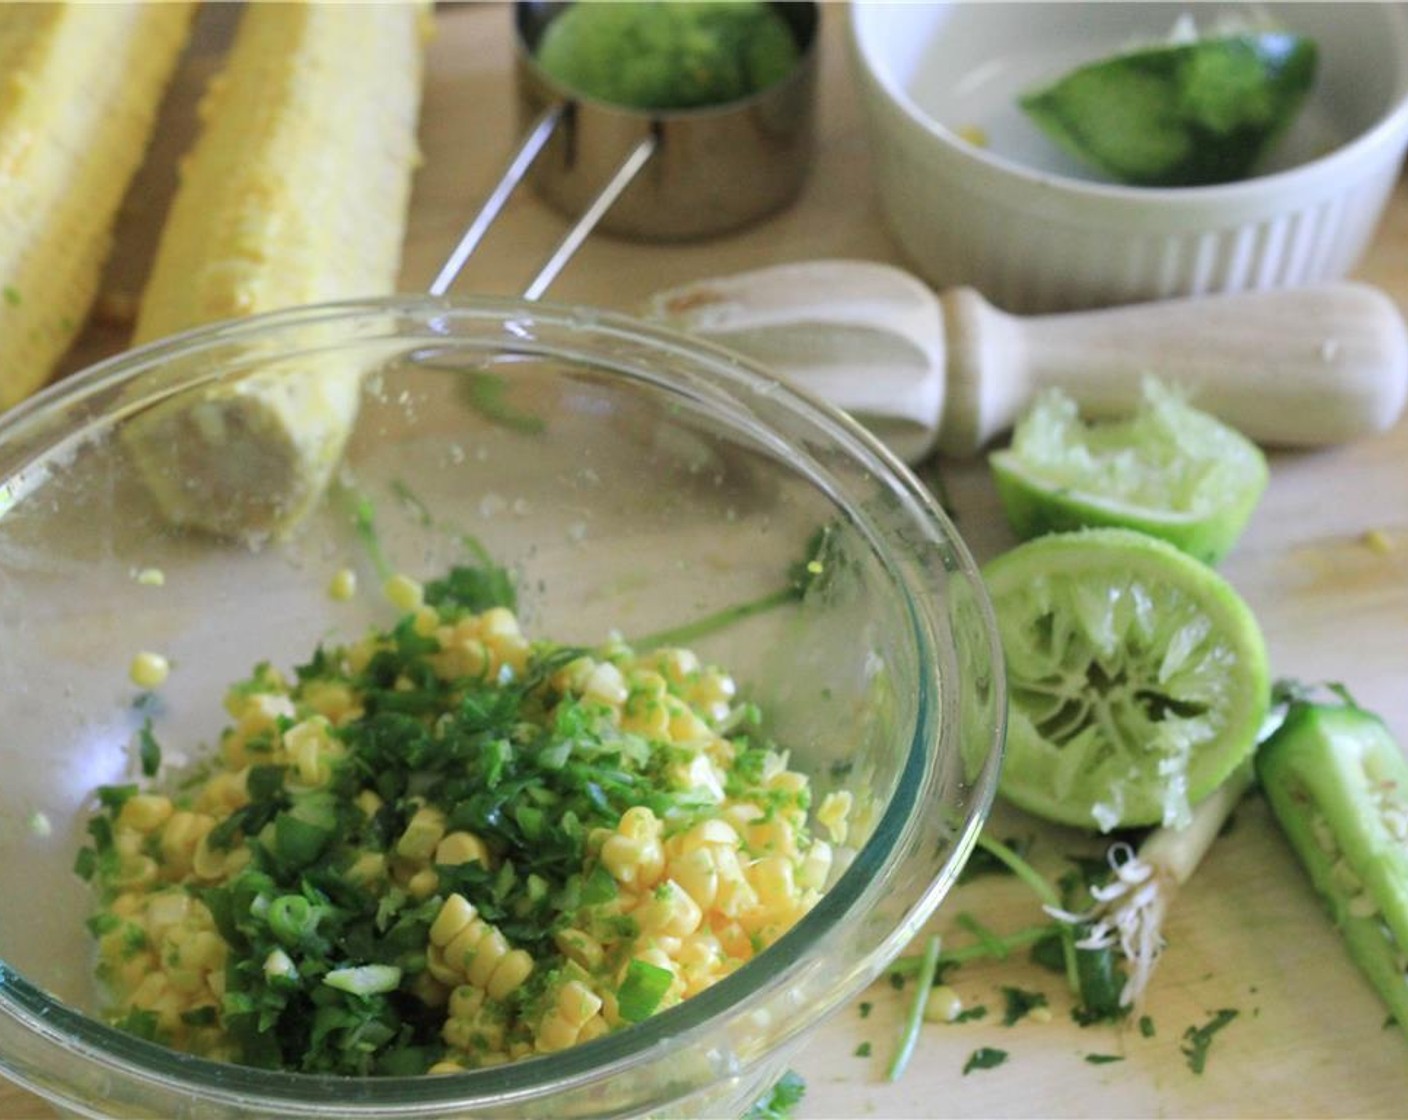 step 4 Add the zest and juice of half the Lime (1), olive oil (1), green onion, and jalapeno to the corn and stir to coat. Add half the cilantro and salt and give it another stir. Allow flavors to blend for 10 minutes. Taste for salt.